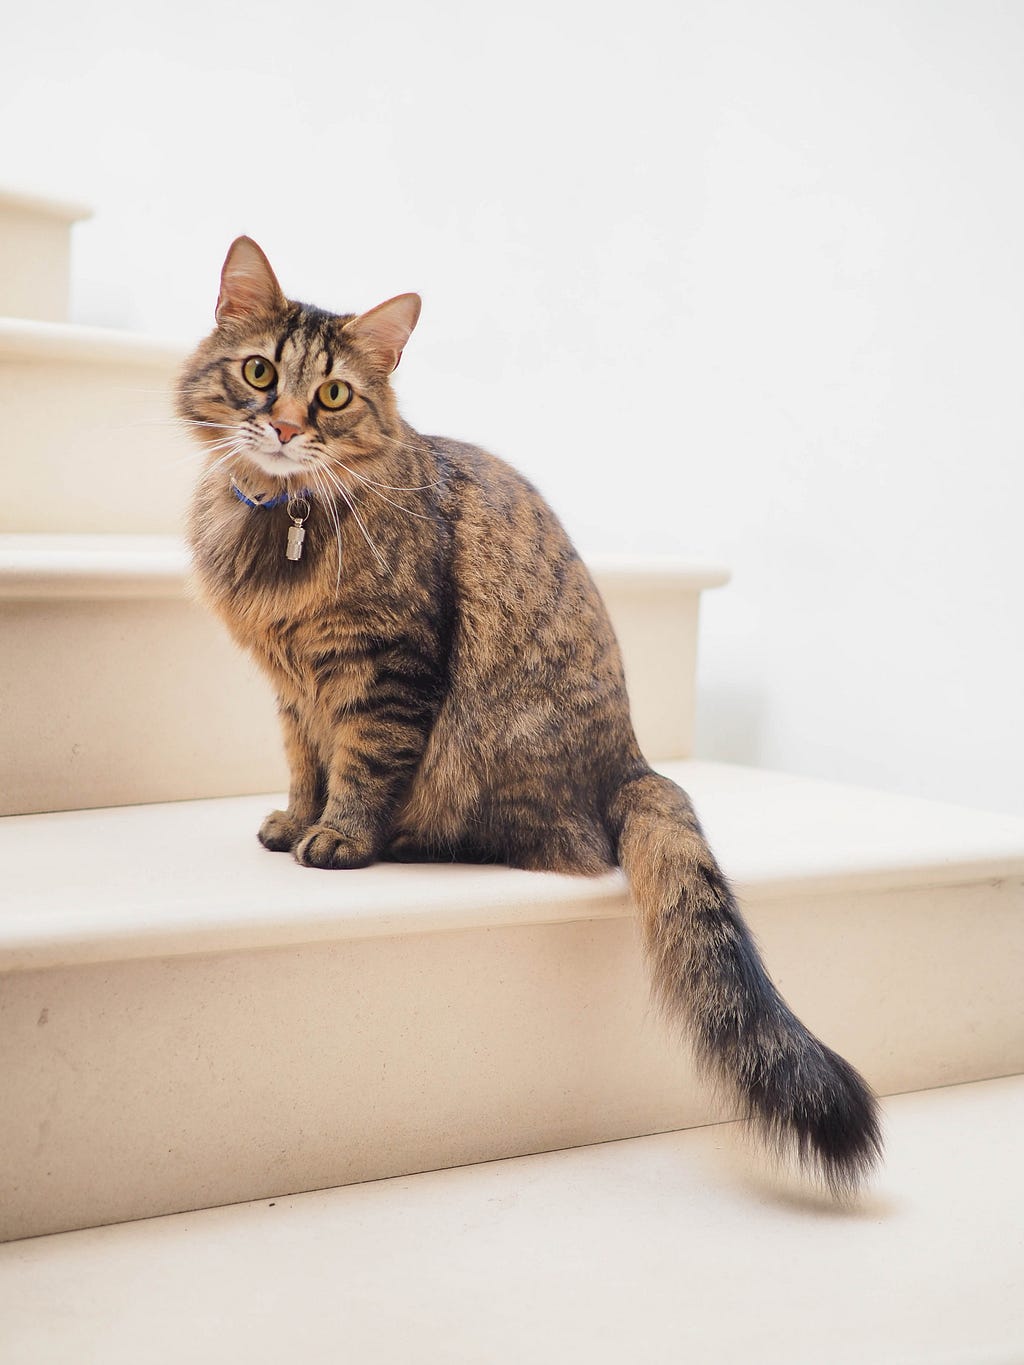 cat picture by   Alexander London from unsplash